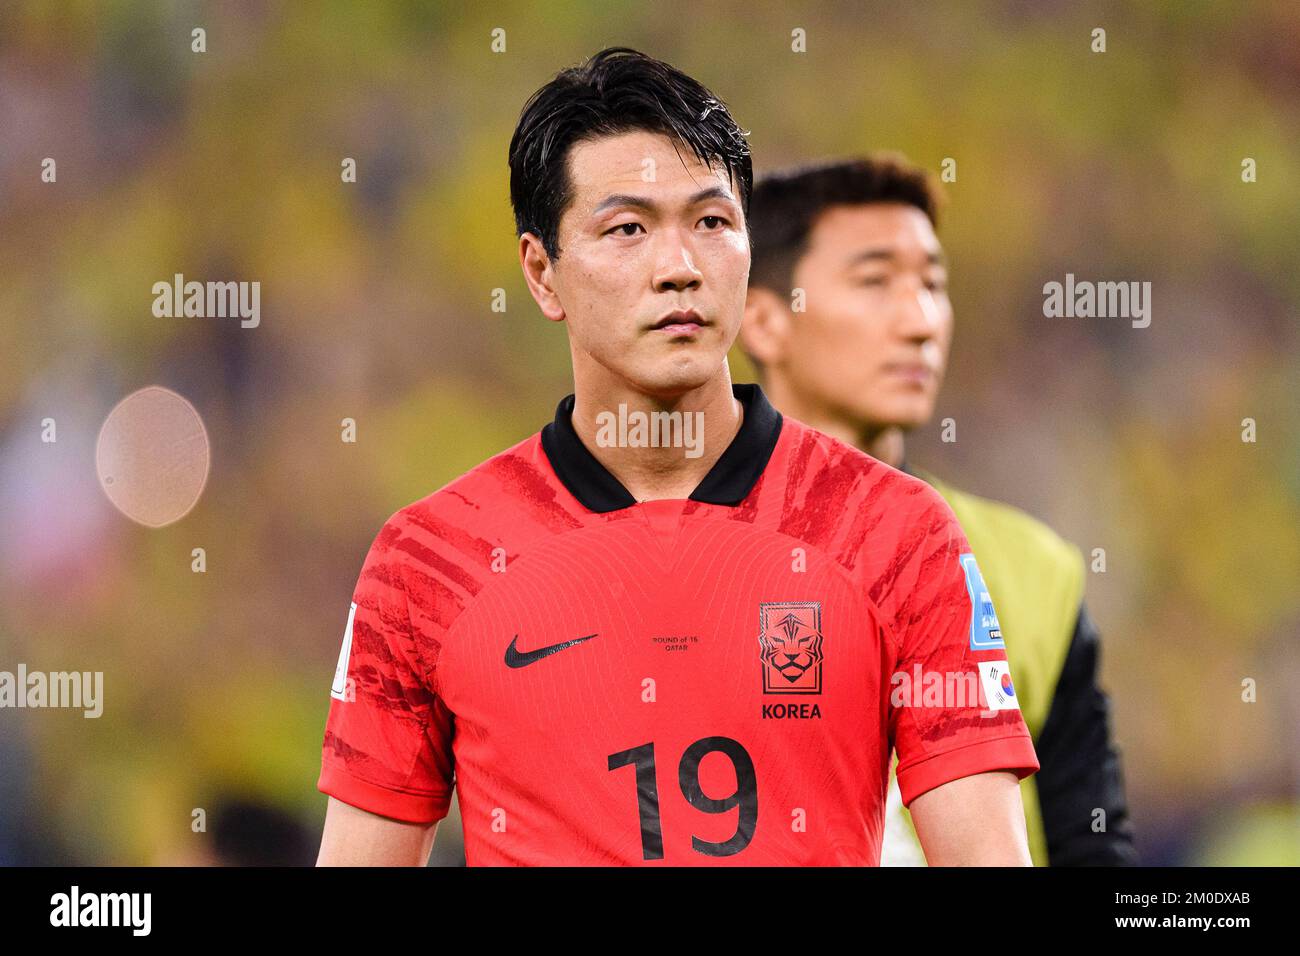 Doha, Qatar. 05th Dec, 2022. 974 Kim Young-gwon Stadium of South Korea during a match between Brazil and South Korea, valid for the Round of 16 of the World Cup, held at 974 Stadium in Doha, Qatar. (Marcio Machado/SPP) Credit: SPP Sport Press Photo. /Alamy Live News Stock Photo